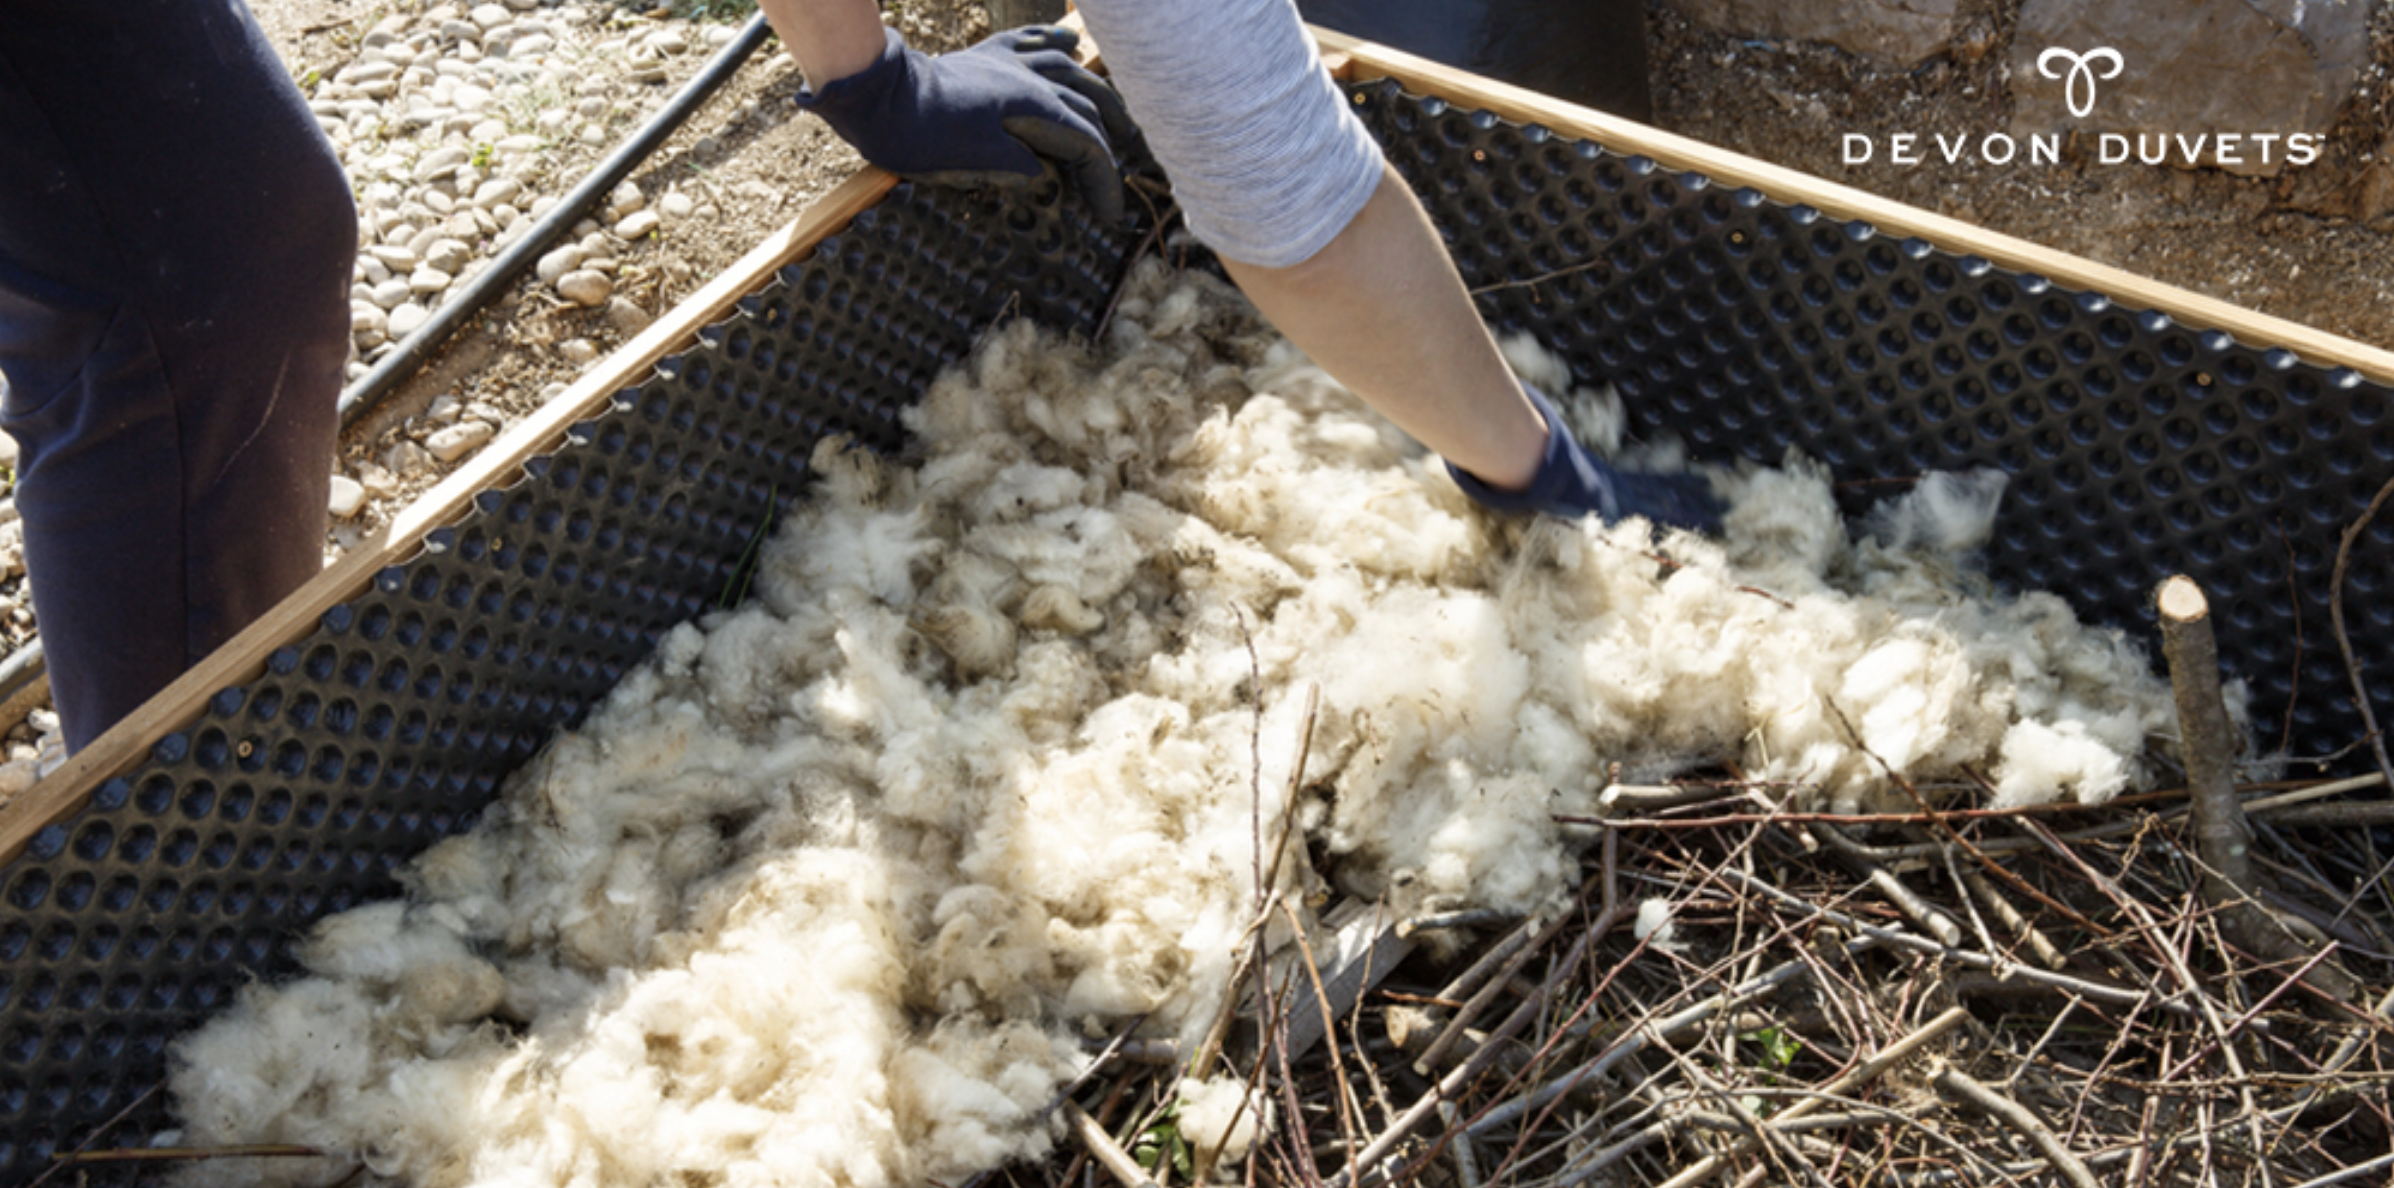 Image of a person adding wool from a Devon Duvets duvet to a compost heap, illustrating responsible recycling practices